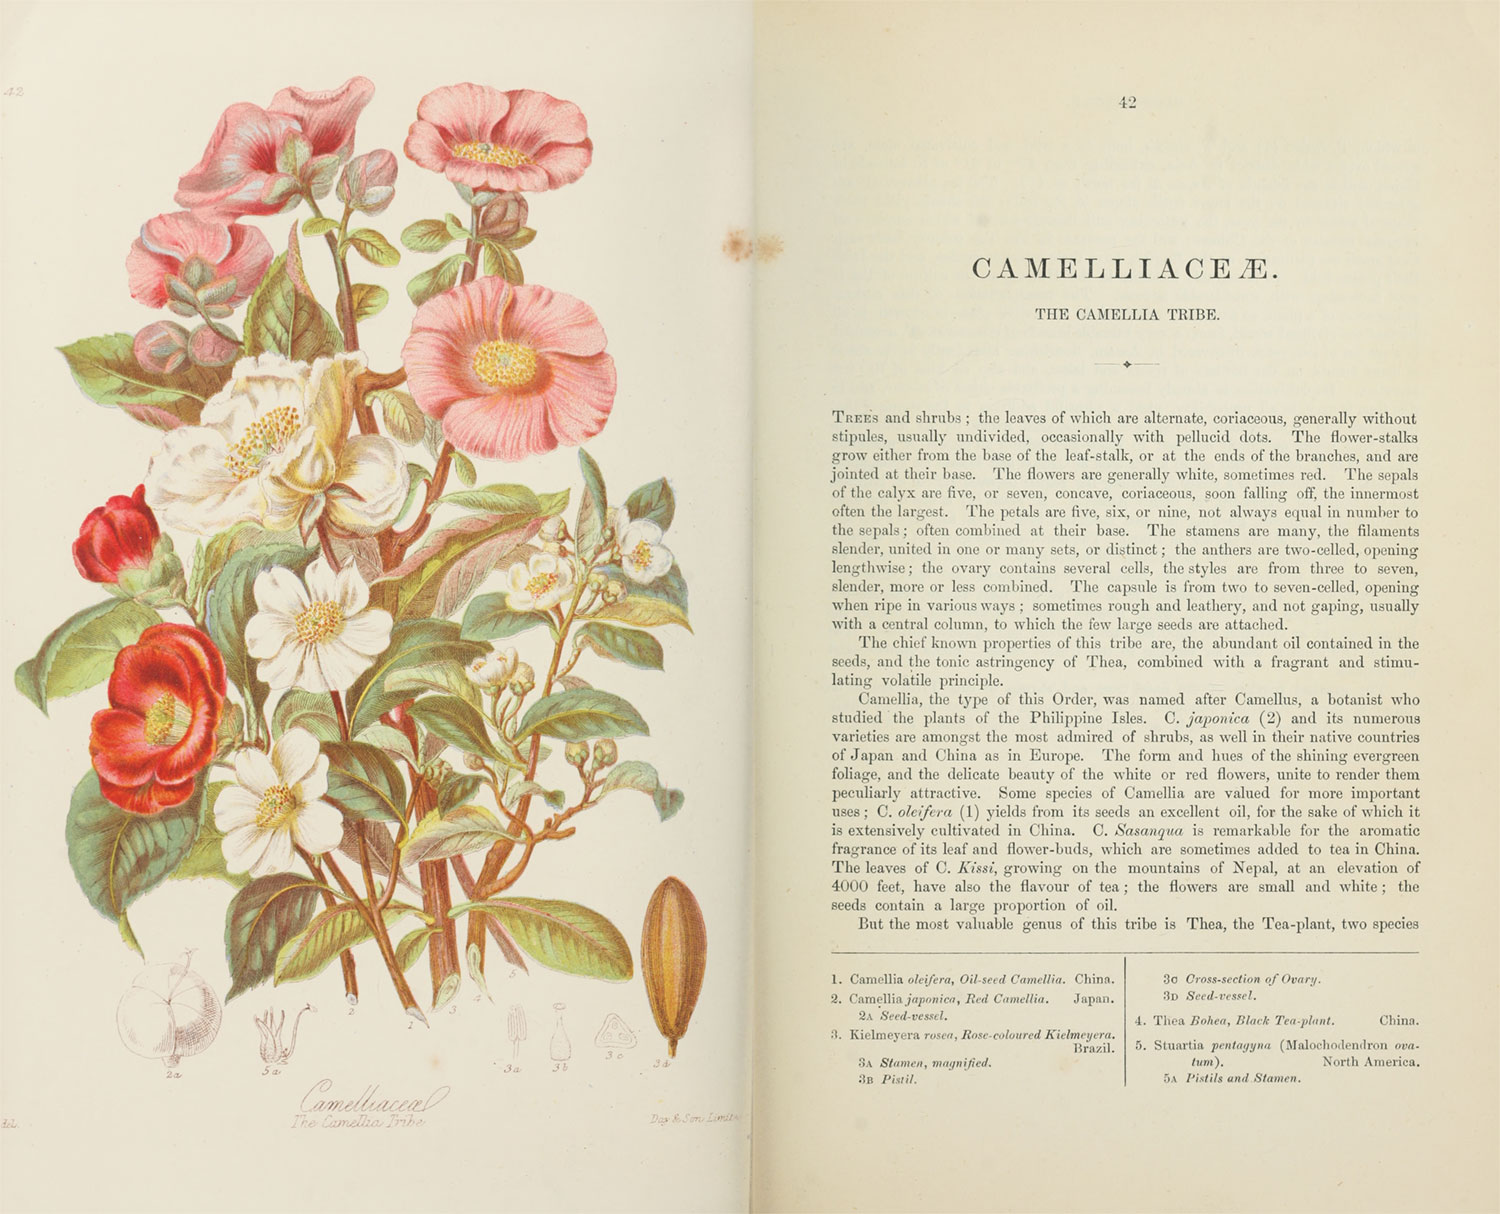 Scans of the original illustration and description of Camelliaceæ, the Camellia Tribe